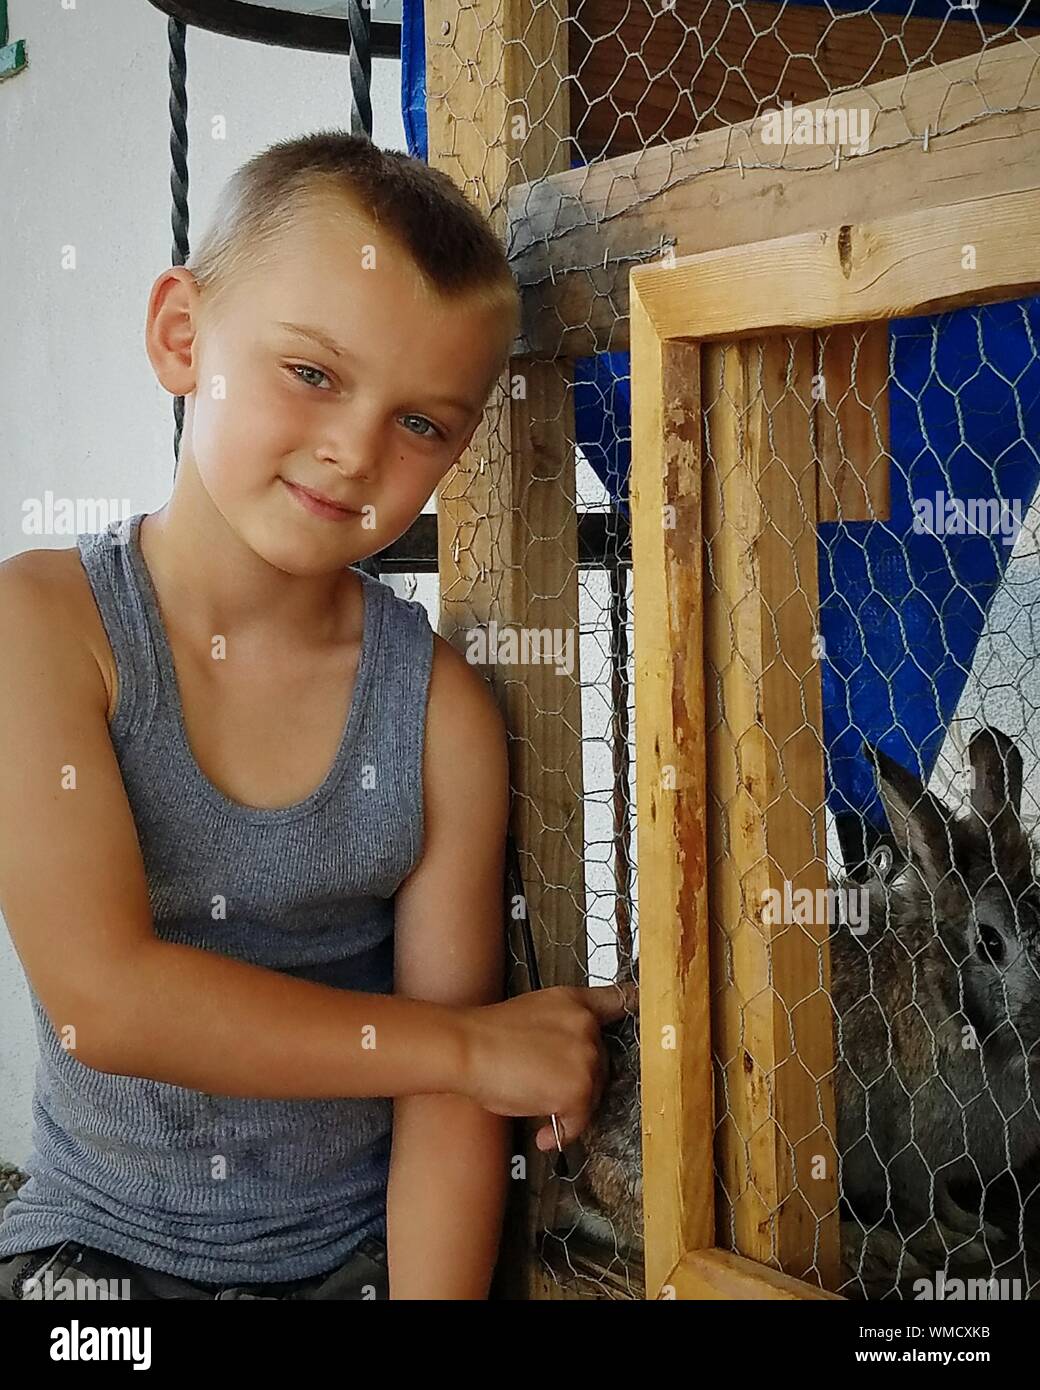 Portrait Of Smiling Boy Standing By Rabbit Hutch Stock Photo